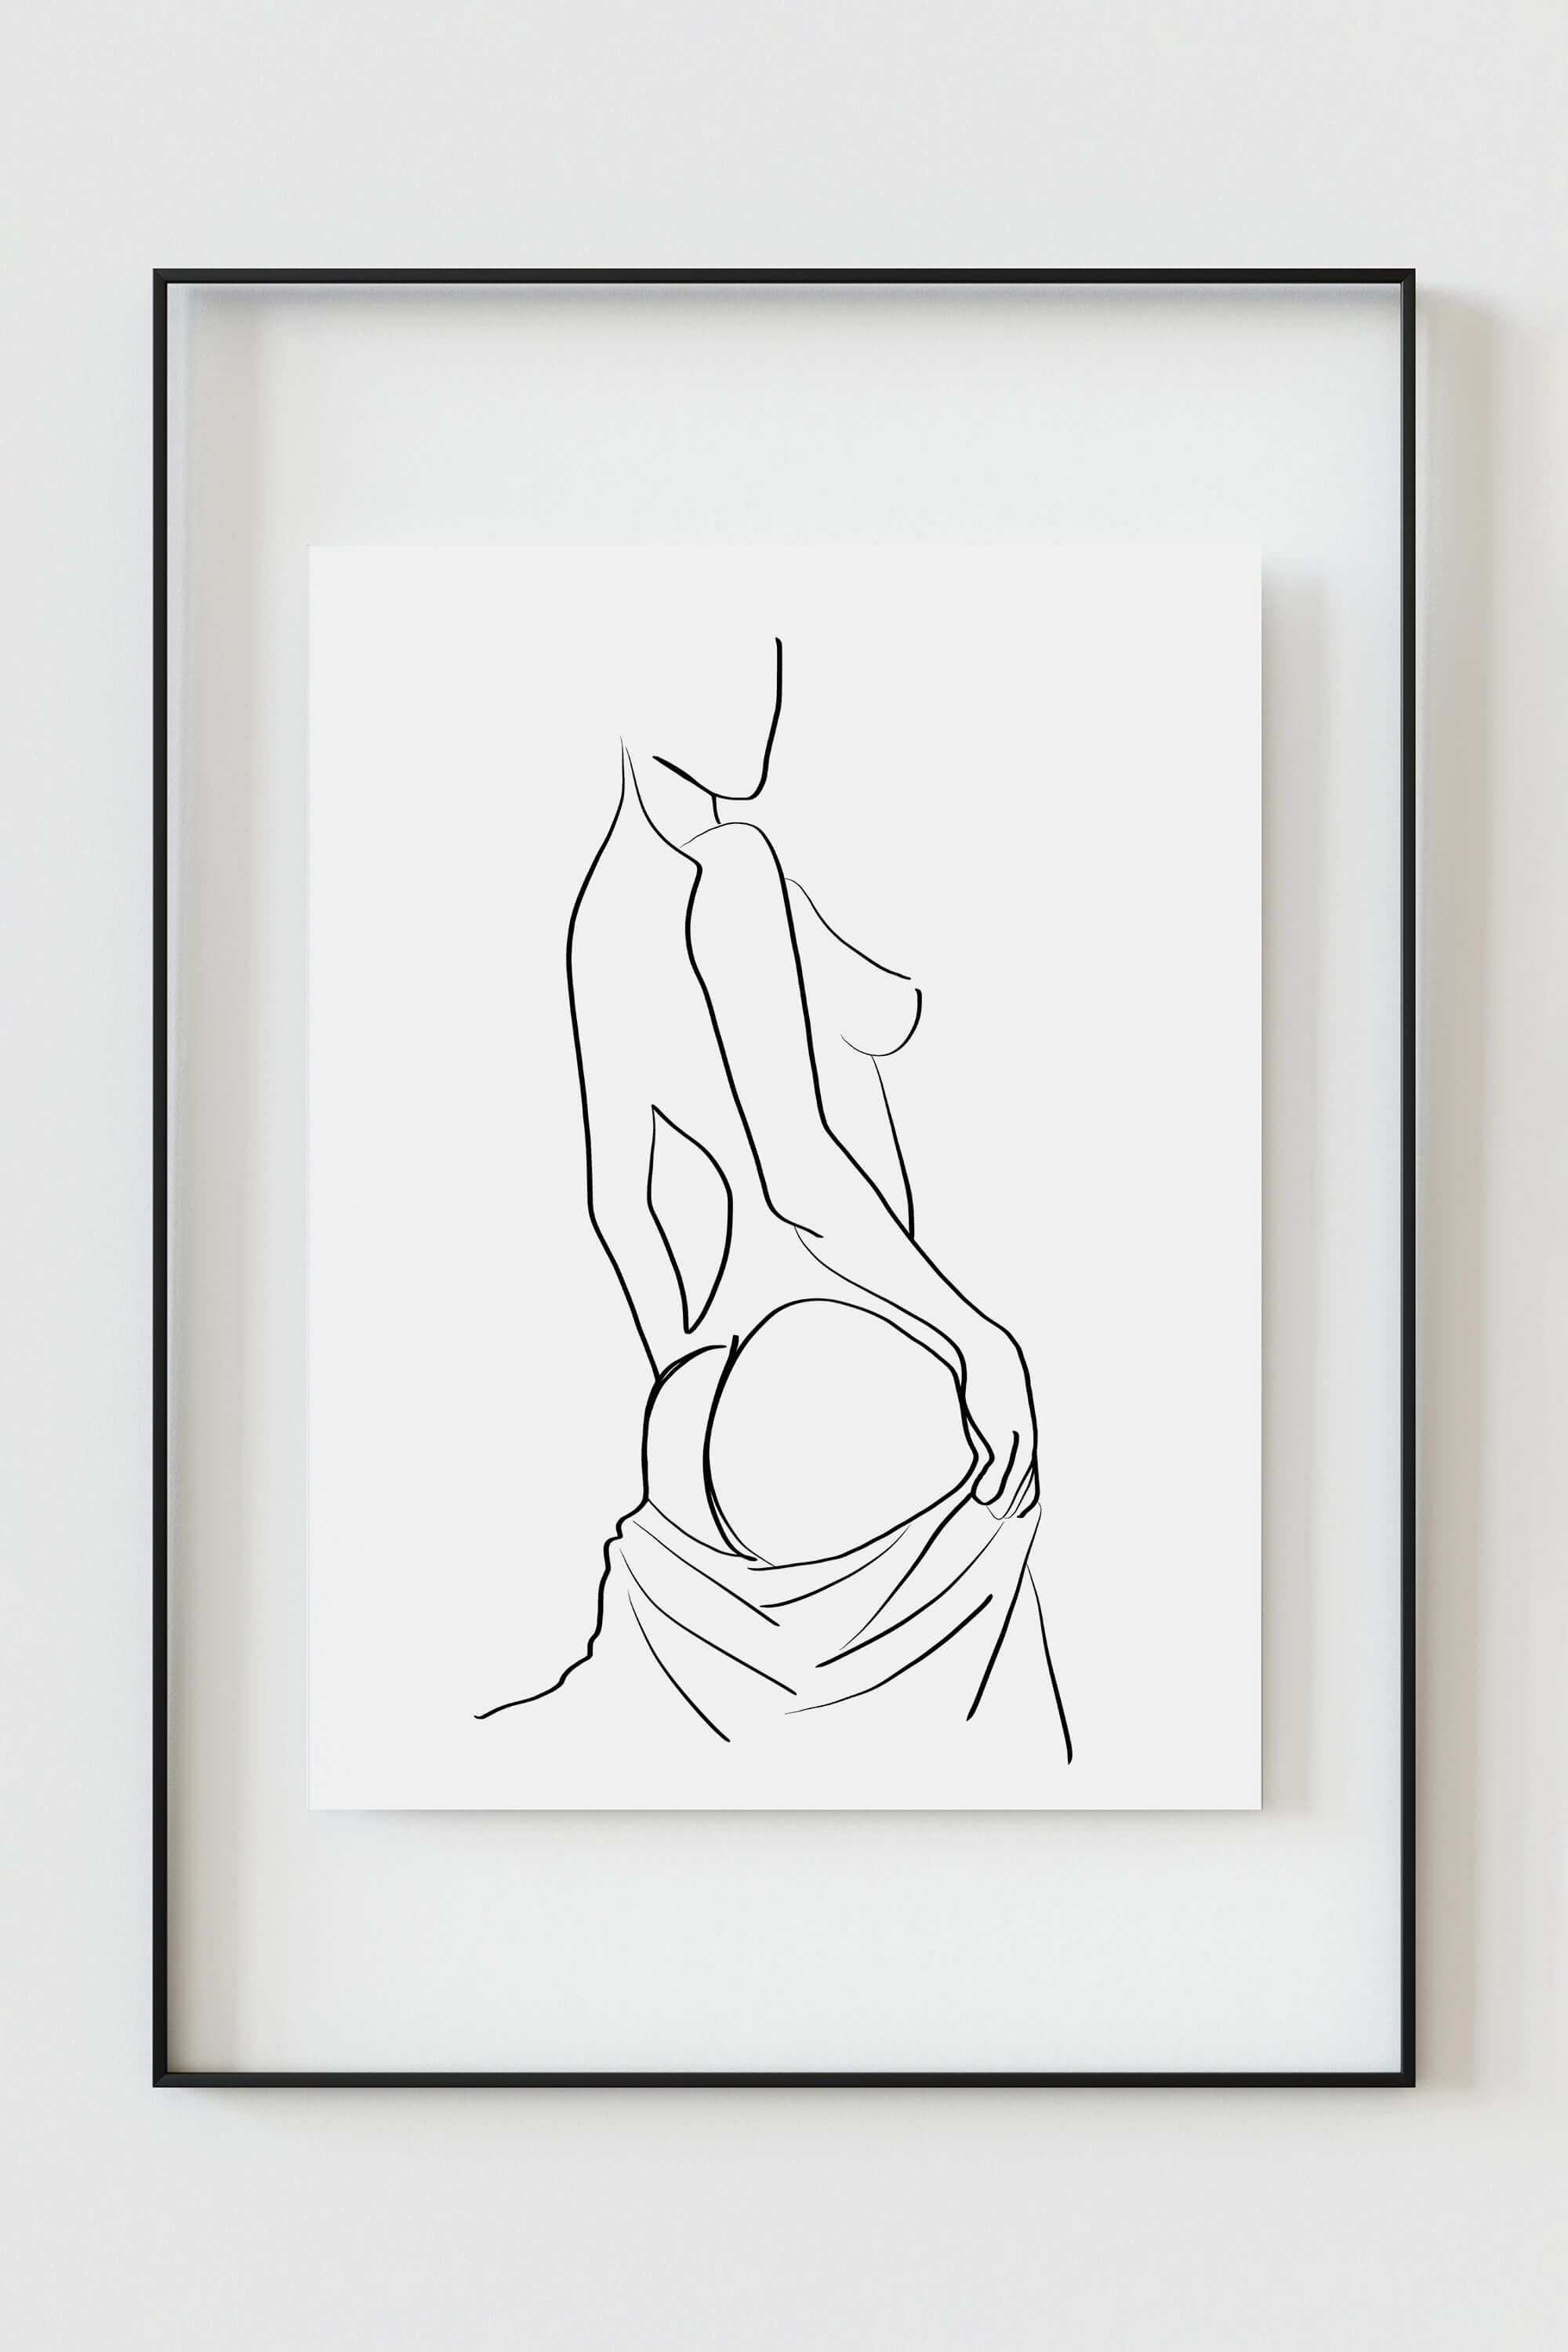 Exquisite line art print capturing the sensual allure of a woman's back. The play of light and shadow in this black and white masterpiece adds a touch of mystery and sophistication to your living space.